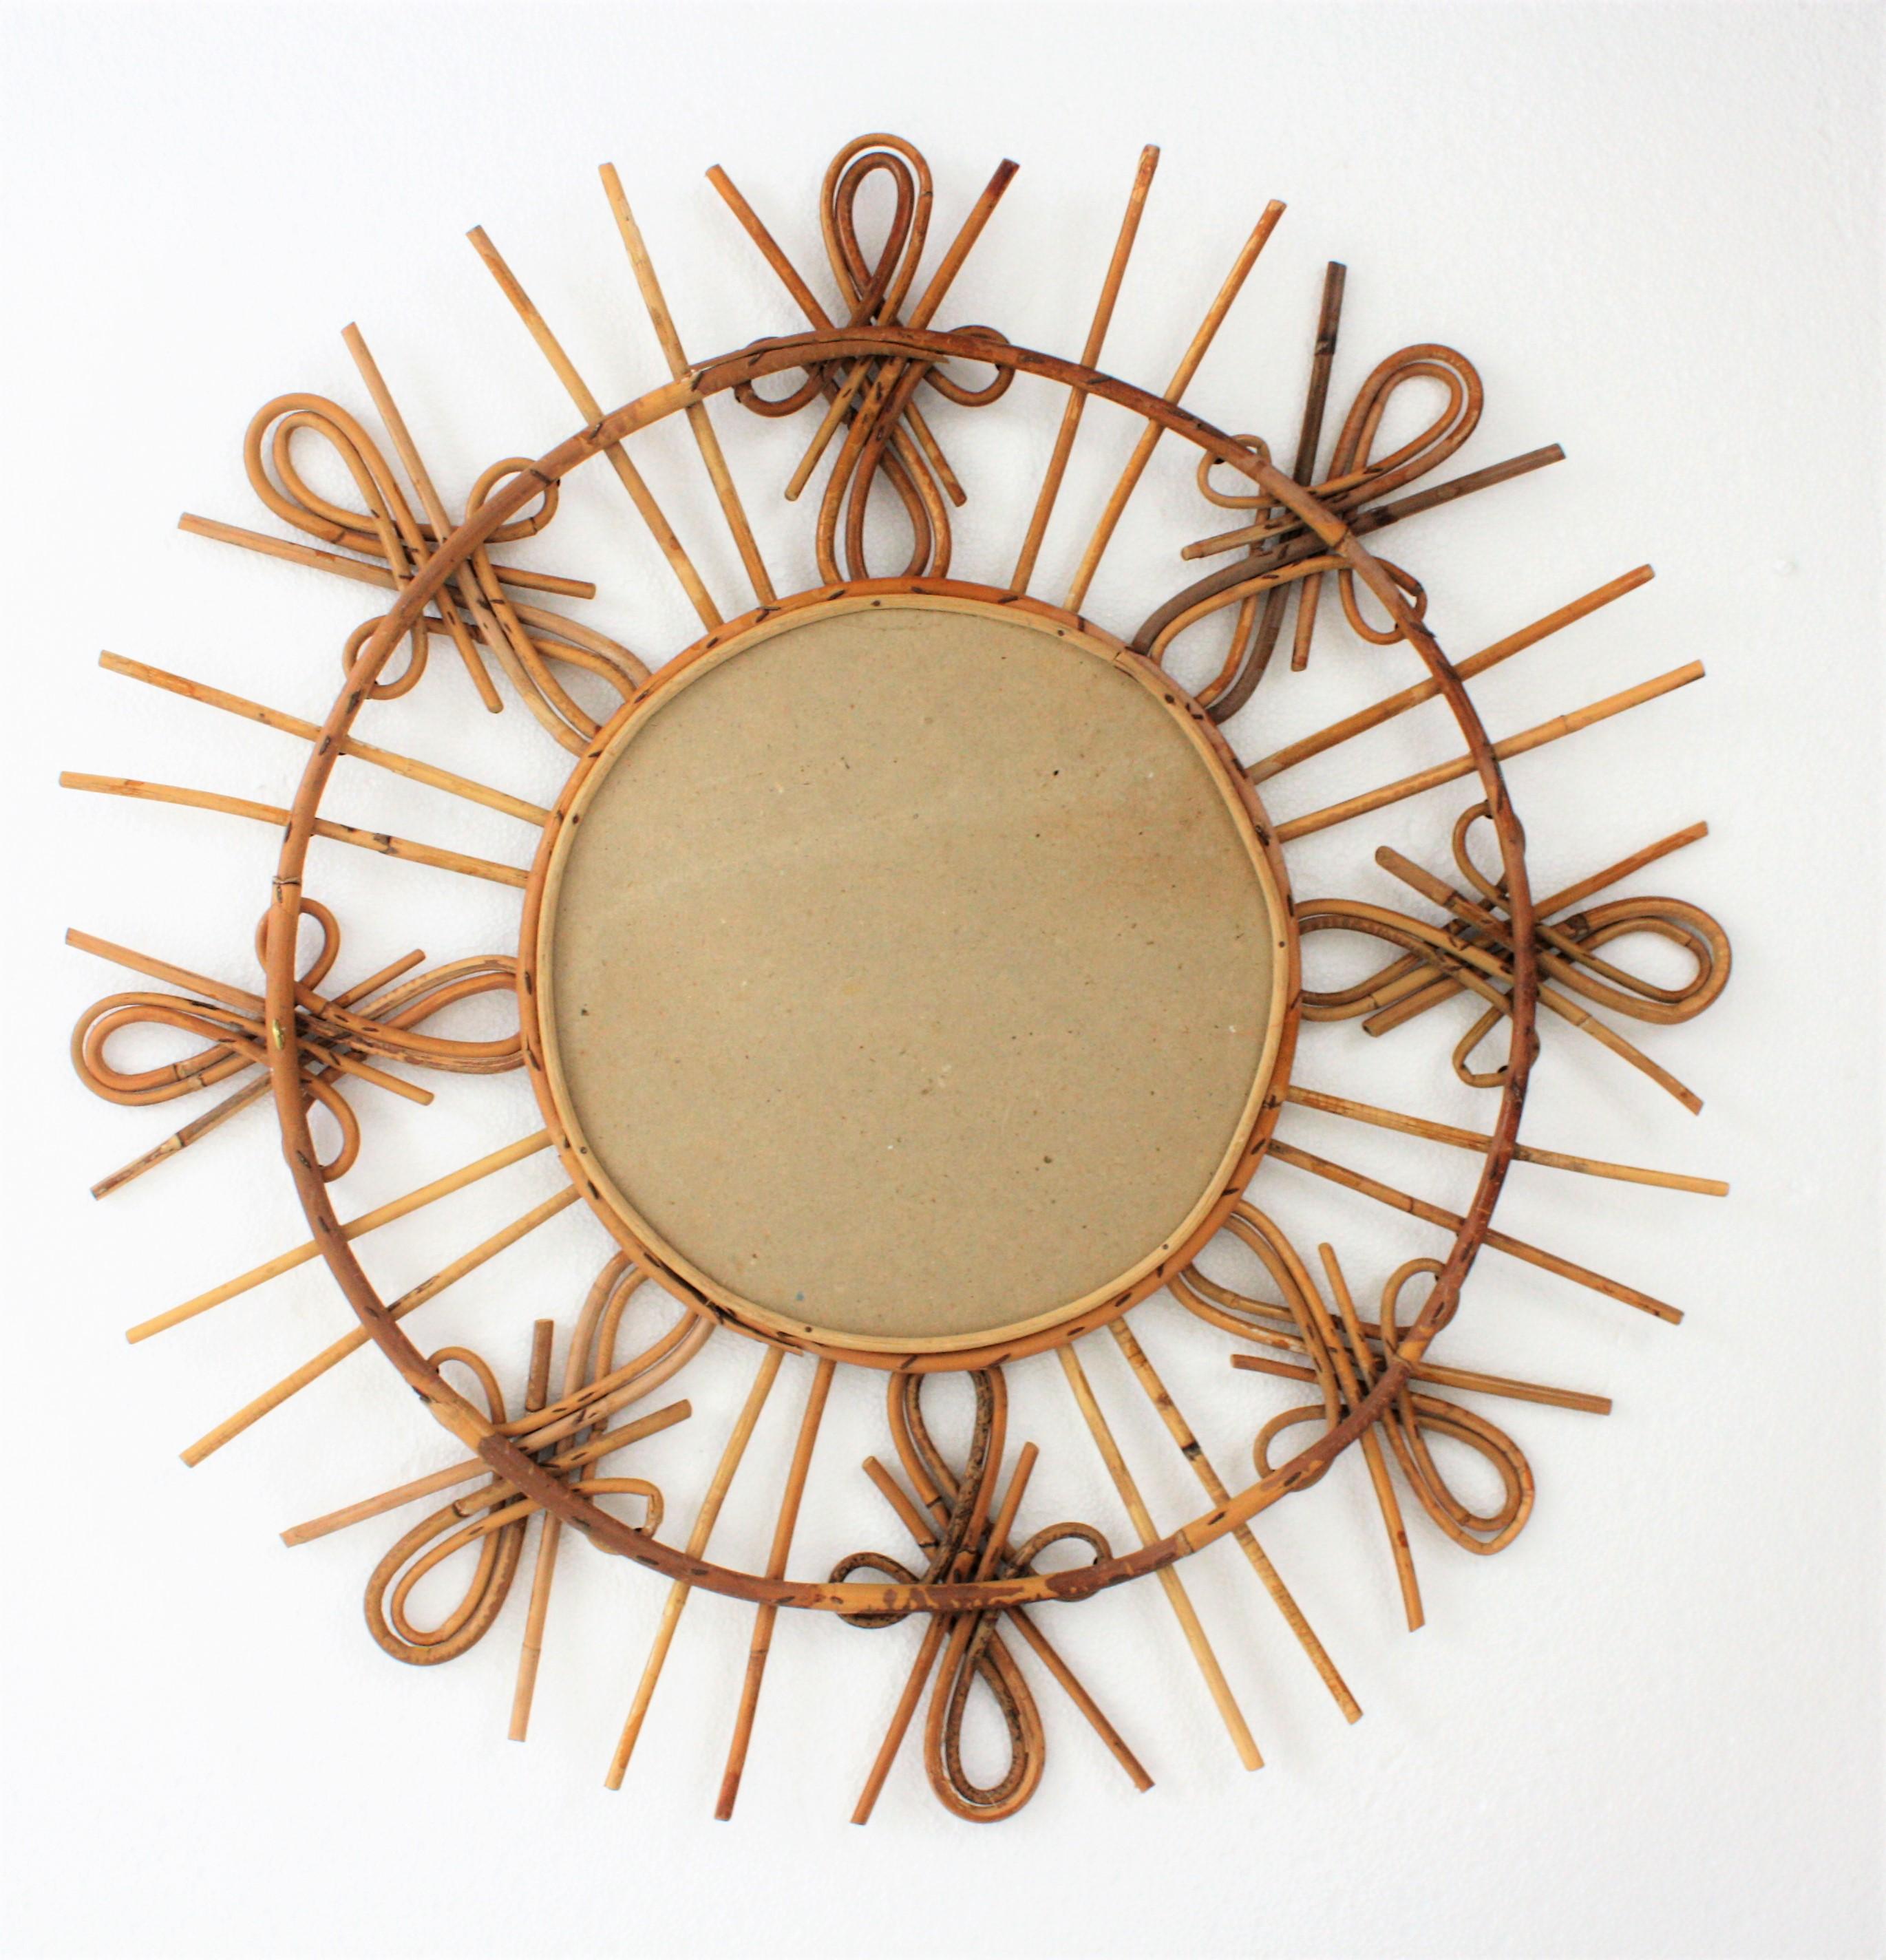 Rattan Sunburst Mirror with Chinoiserie Motif, 1950s For Sale 5